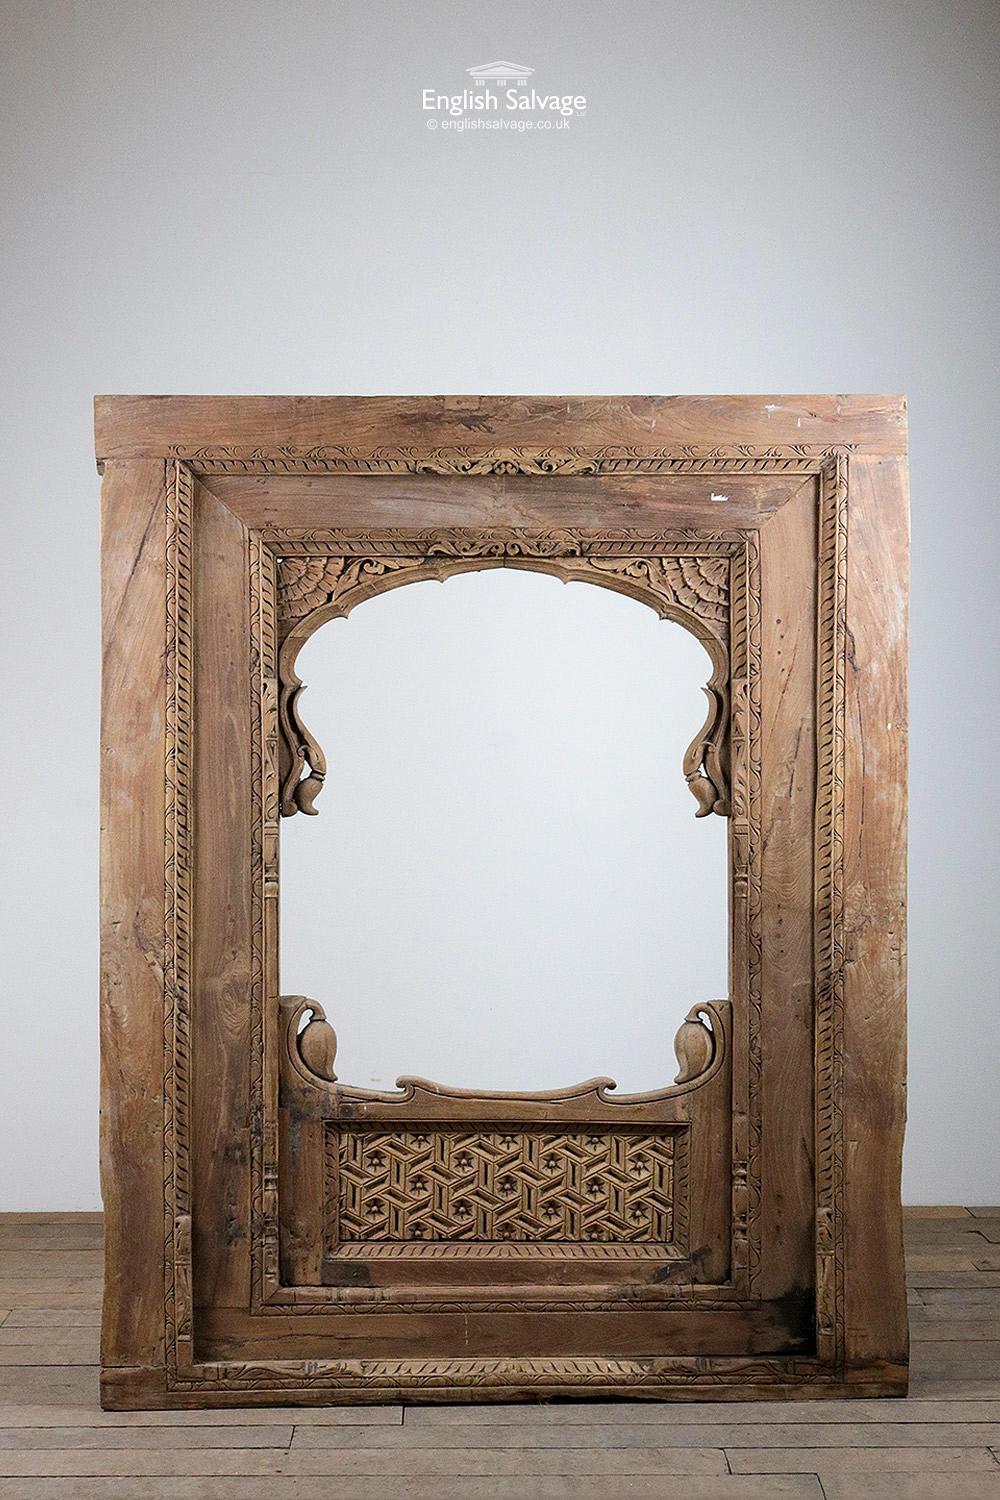 Reclaimed Indian hardwood frames / panels with intricate carving and detail throughout. In one piece, these are very heavy. There are two of these panels available (one shown in photos) both very similar in appearance. Measurements given are the